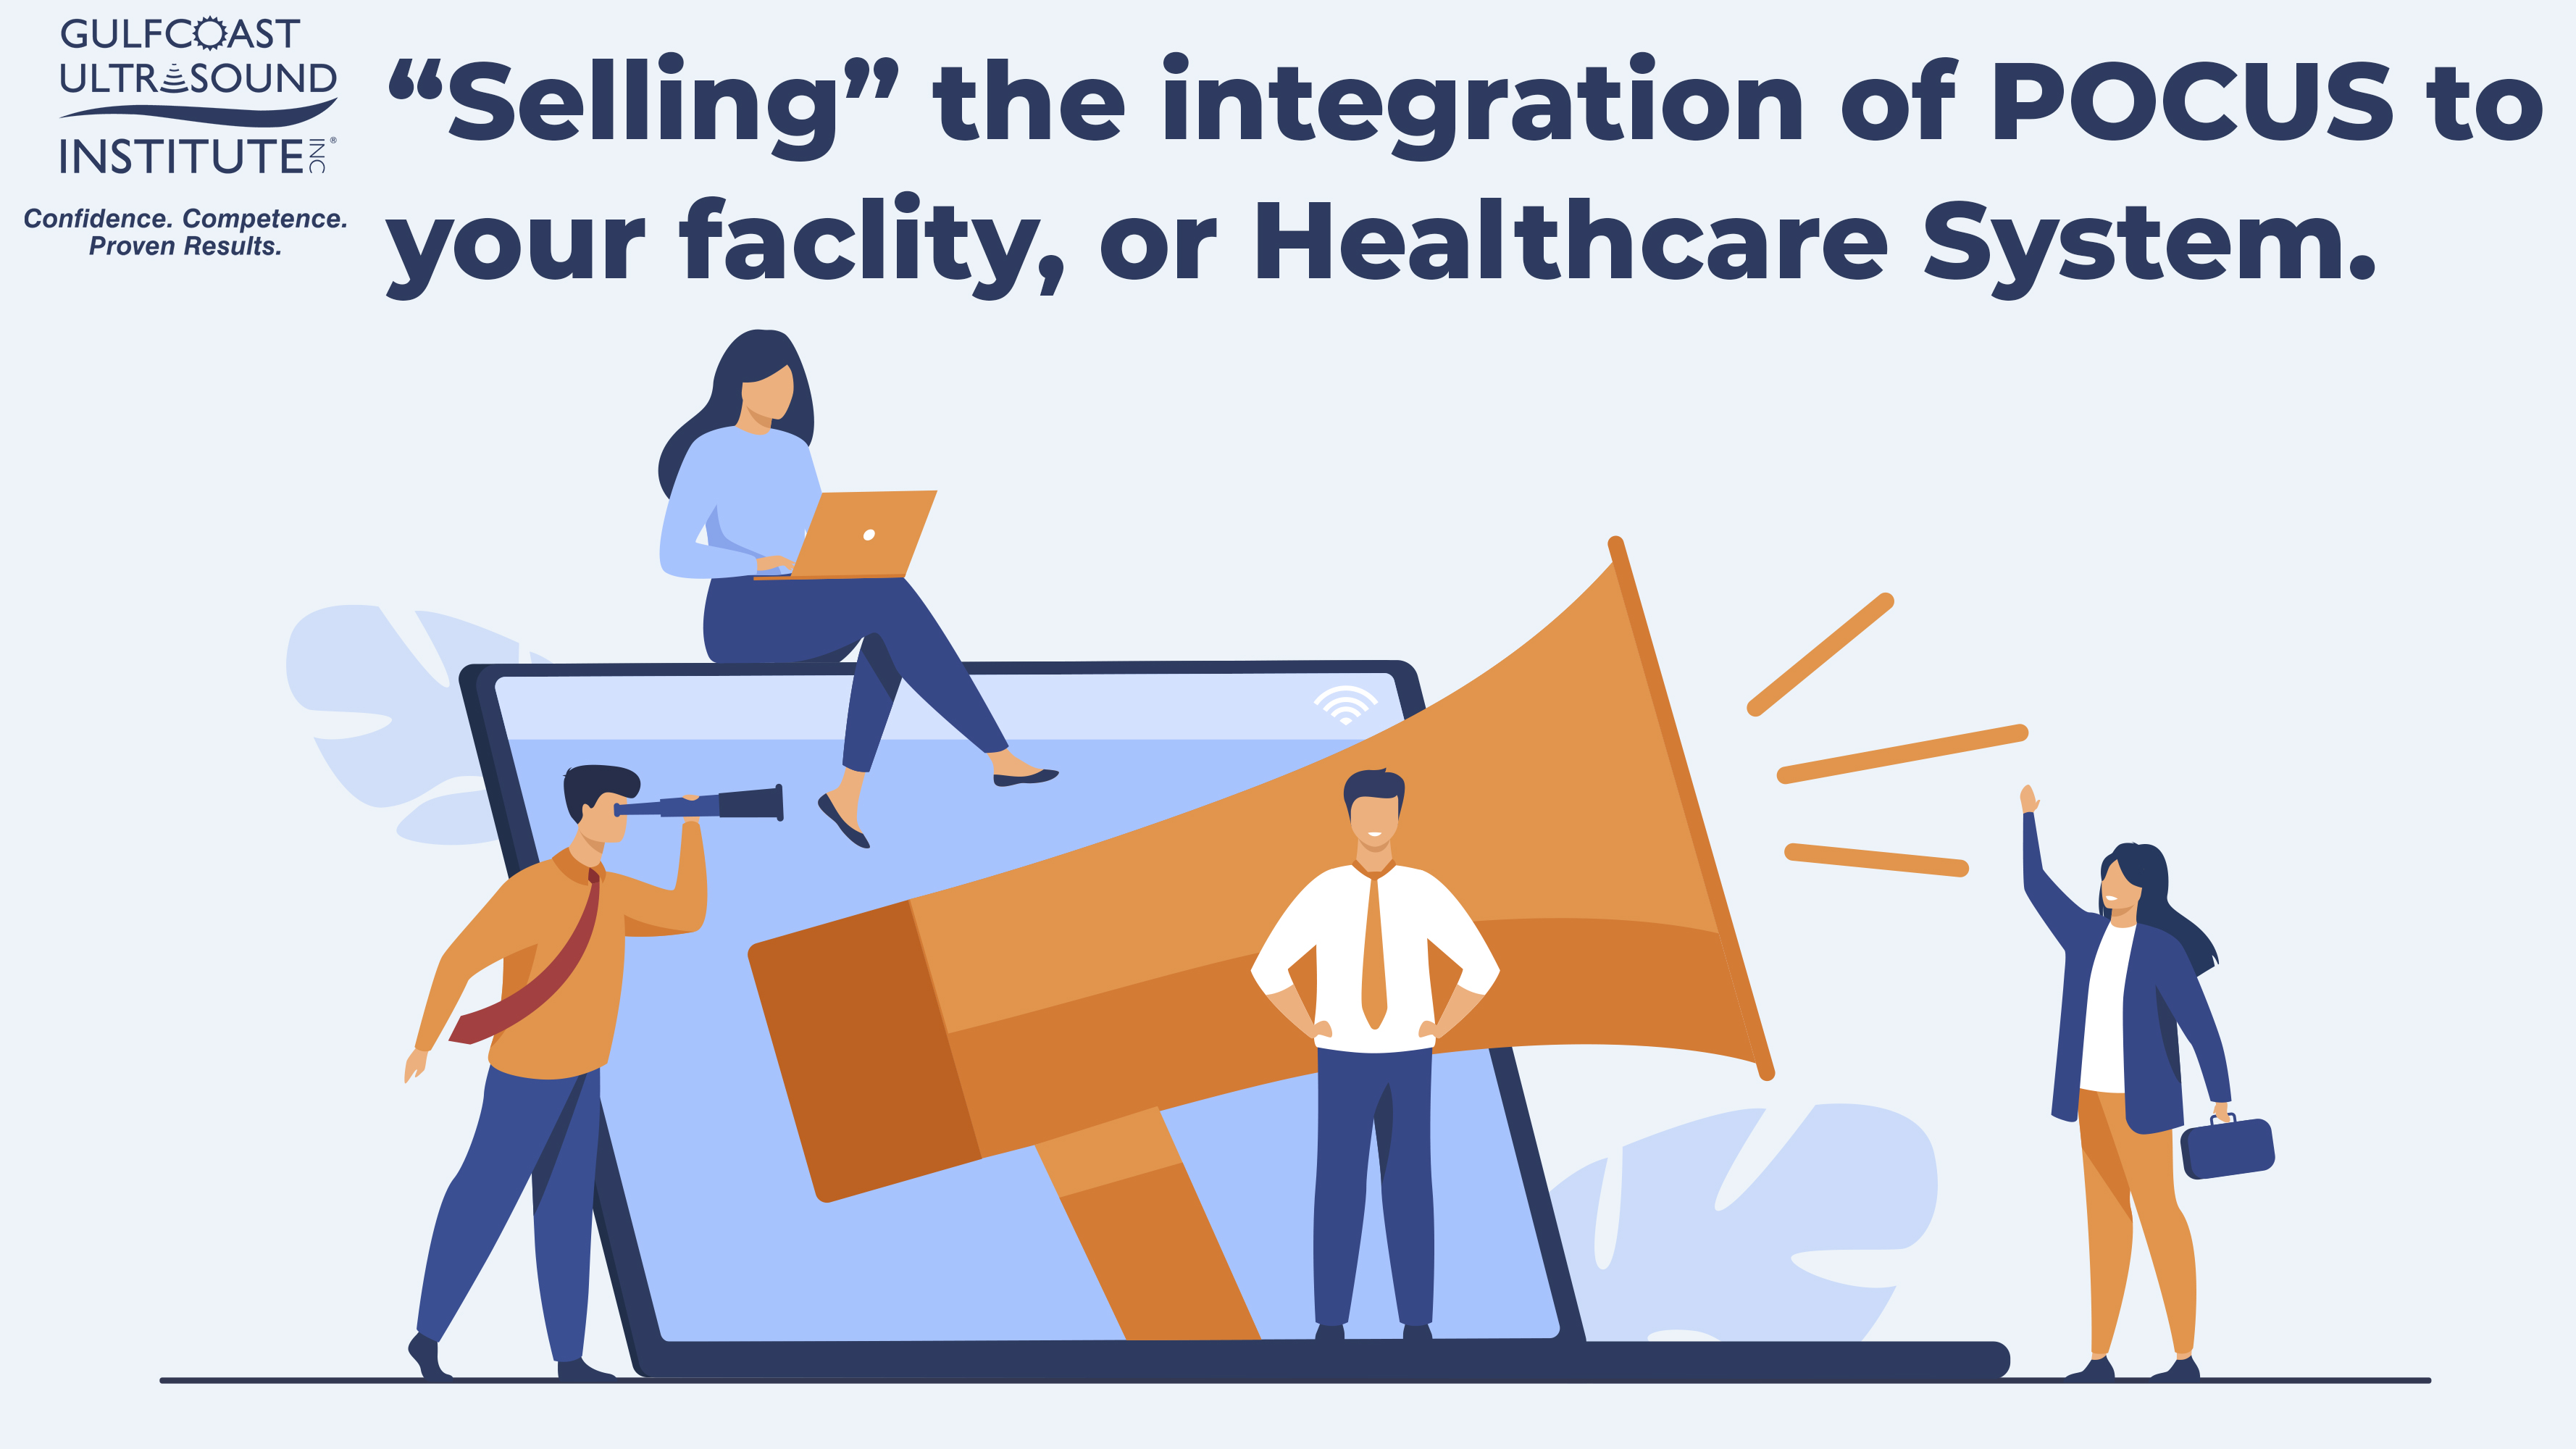 <h1><strong>“Selling” Point of Care Ultrasound to your facility.</h1></strong>